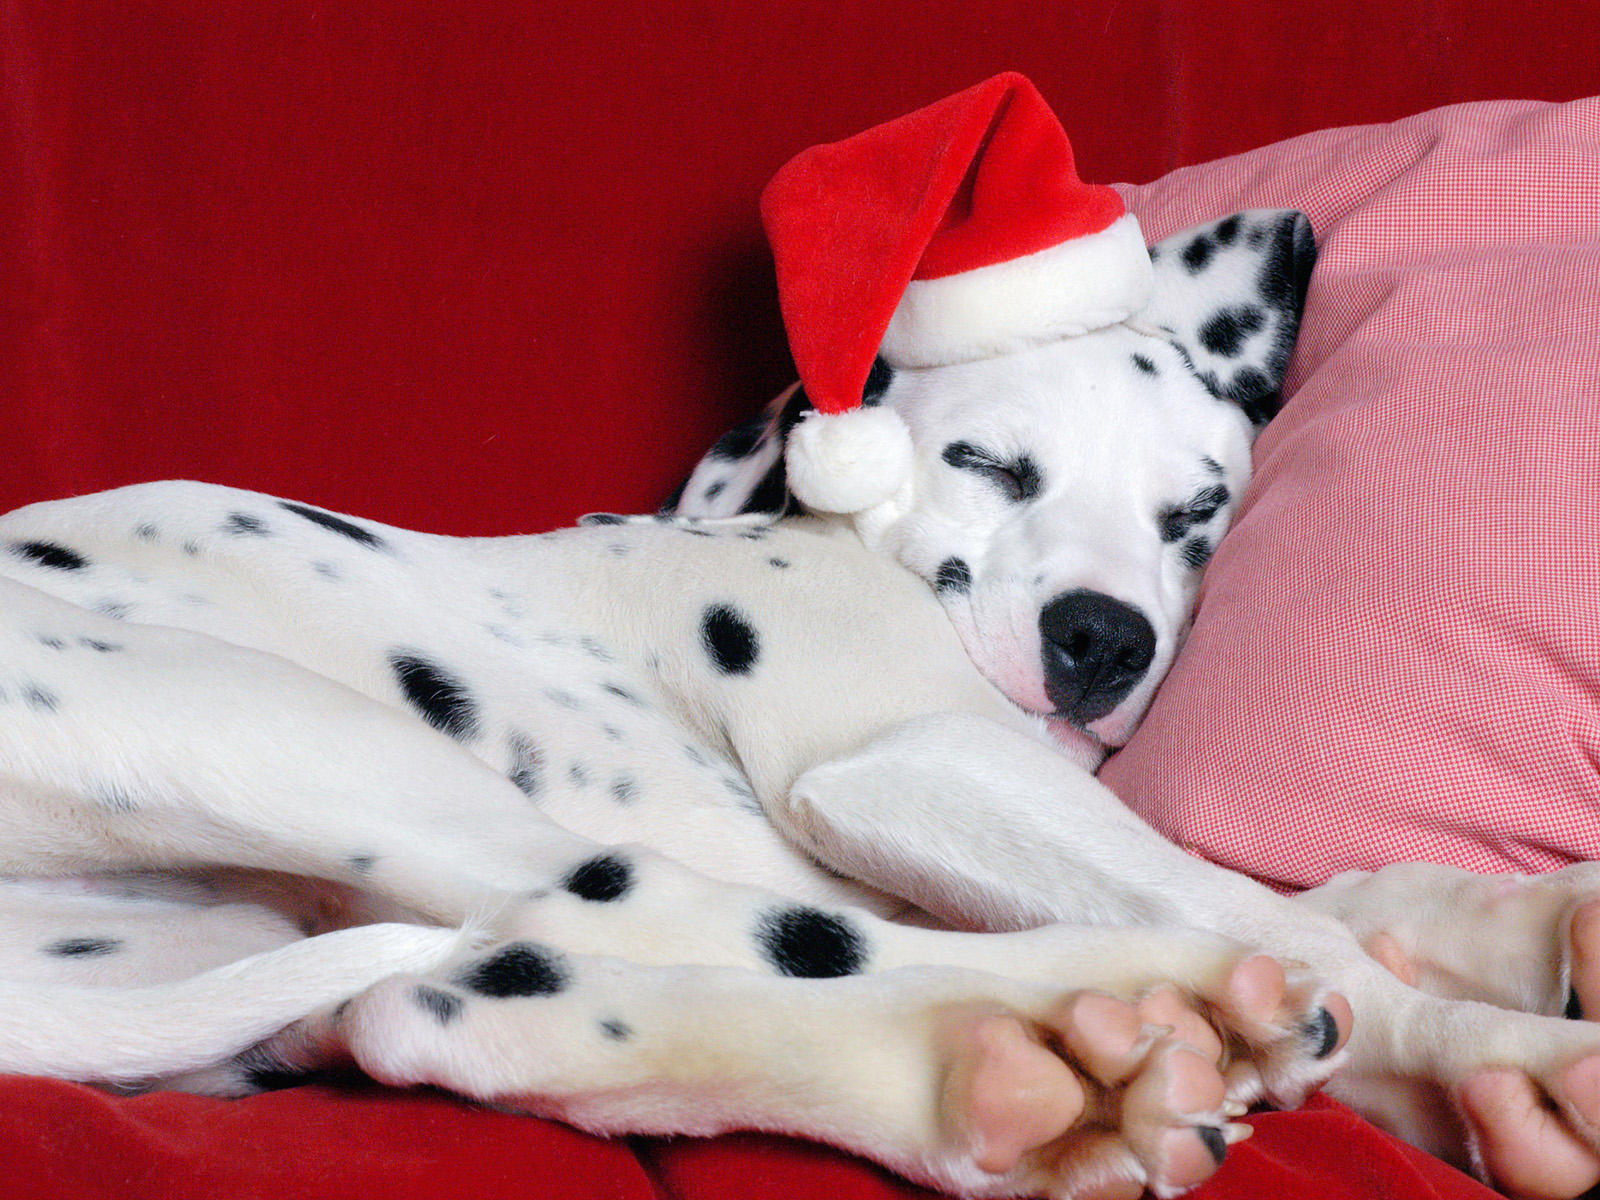 Dalmatian Dog Asleep With Head On Pillow Wearing Father